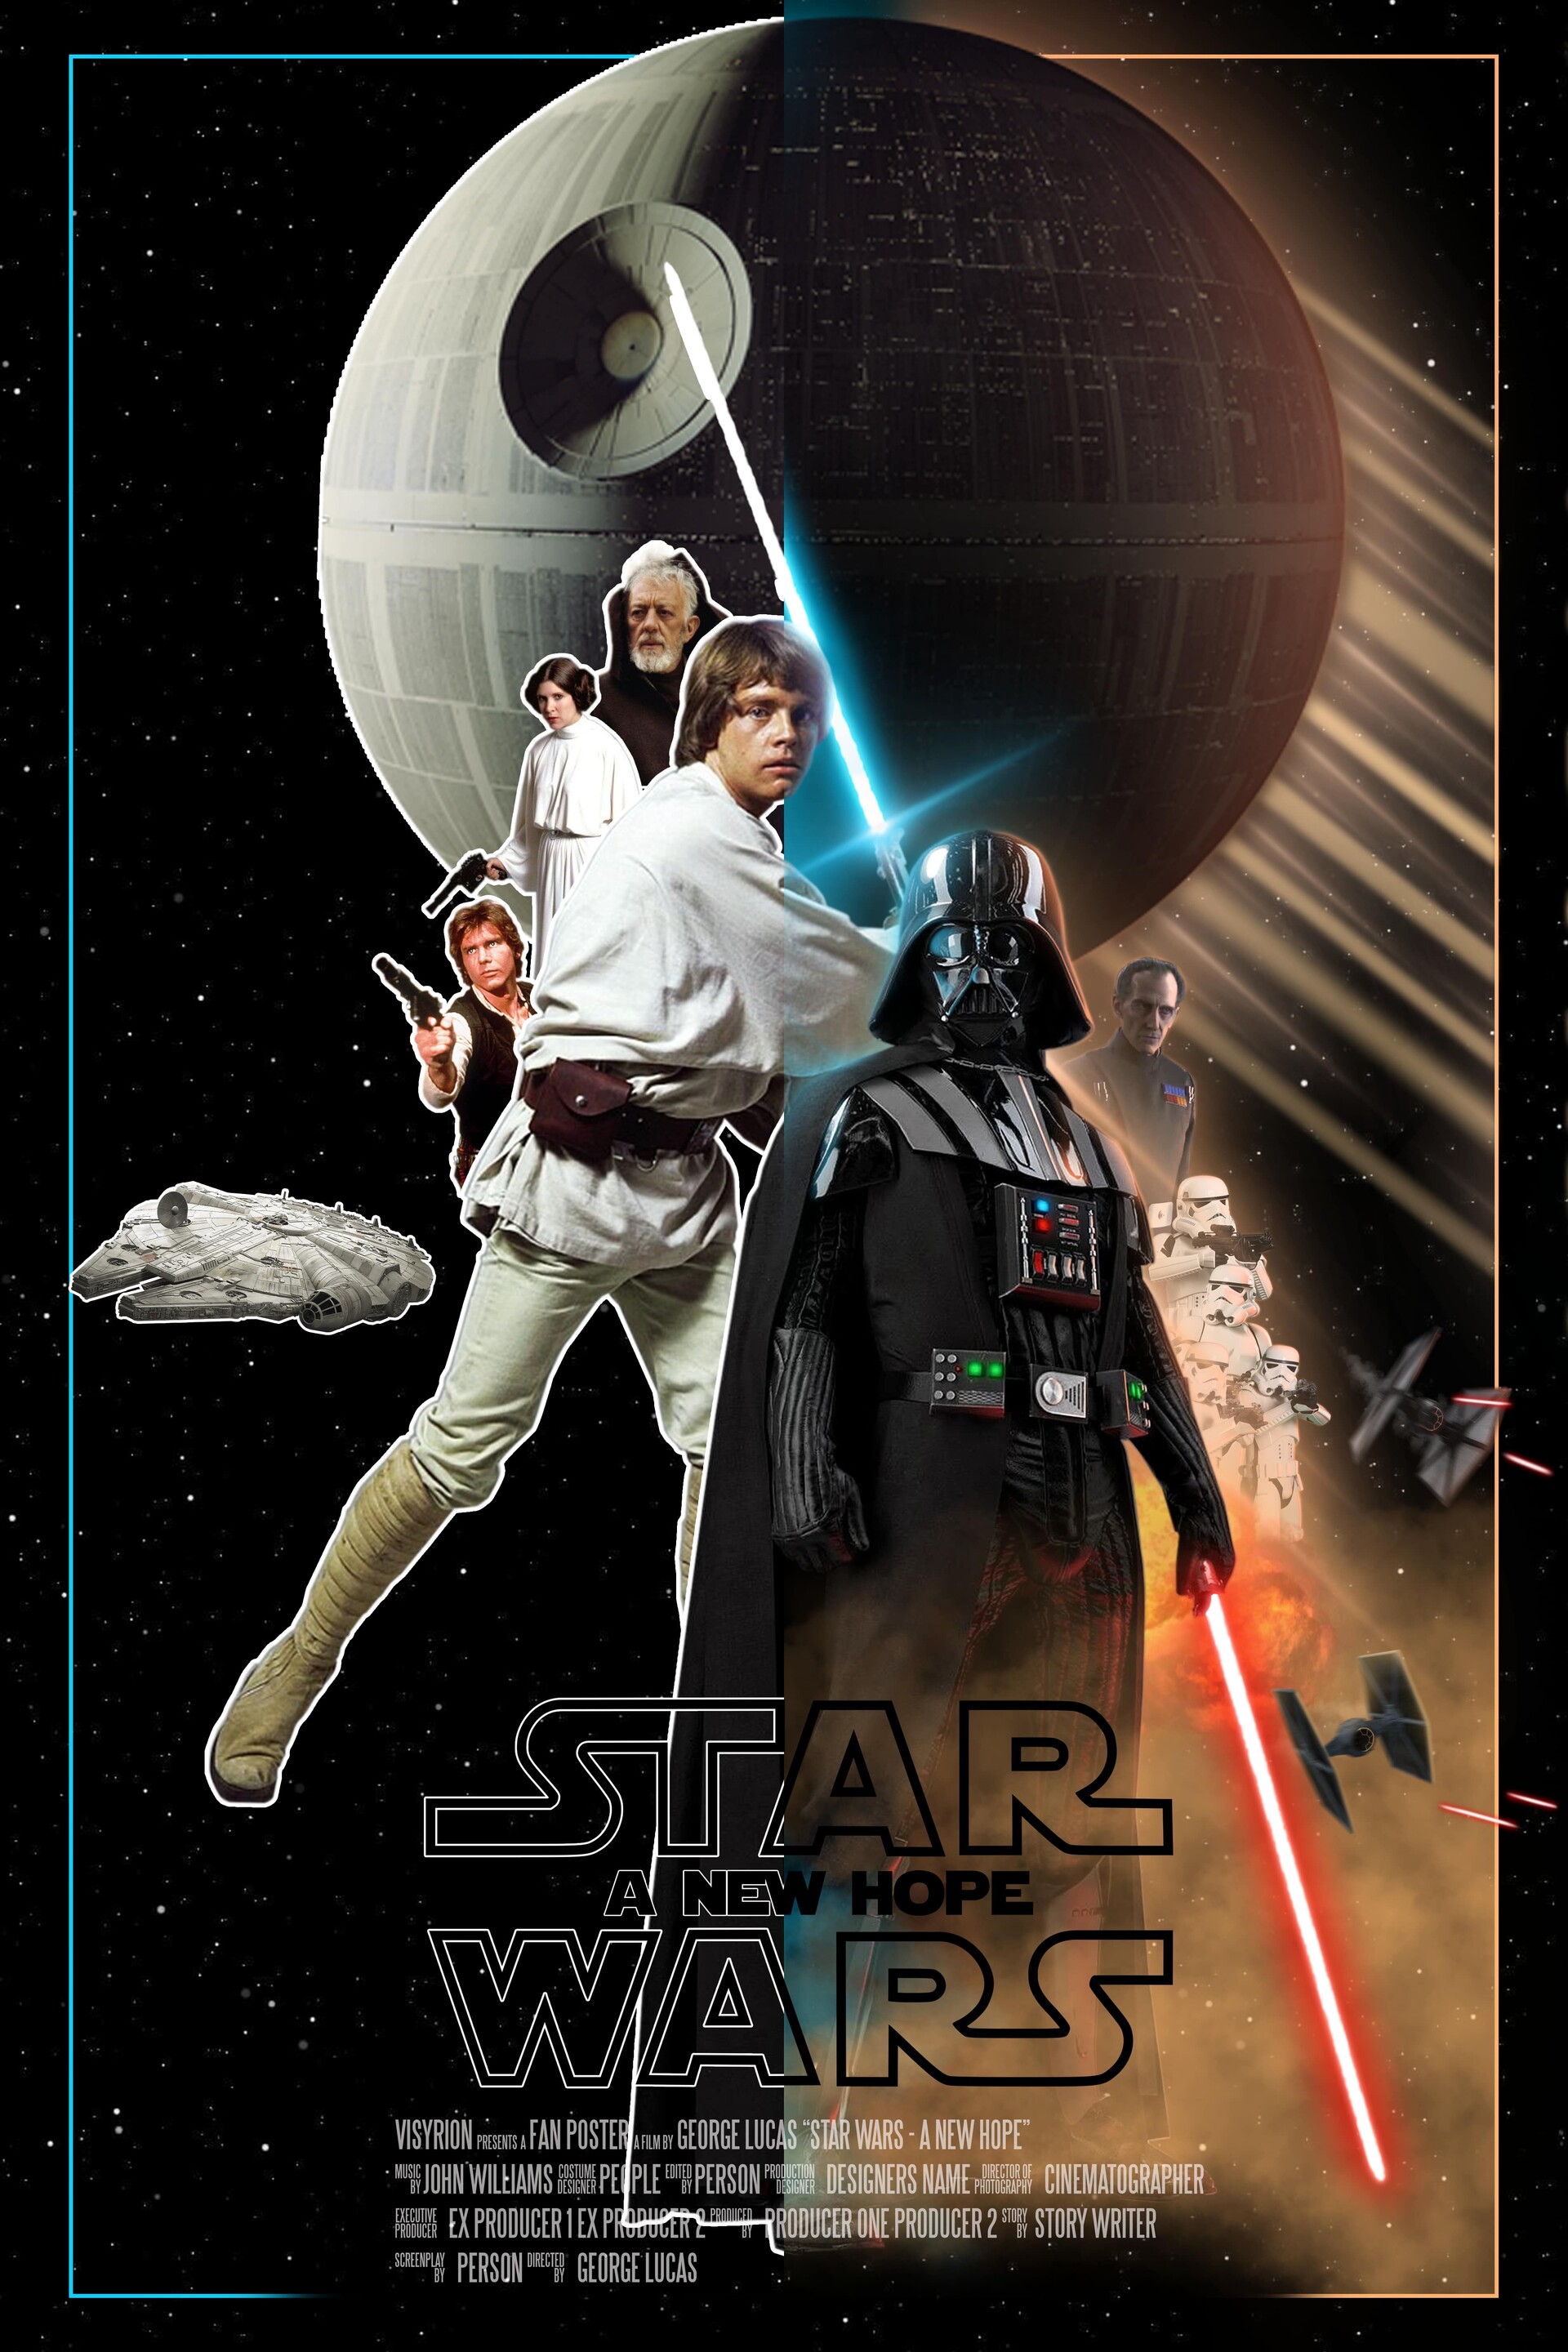 Star Wars A New Hope Art Movie Poster Canvas HD Print 12 16 20 24" Episode IV